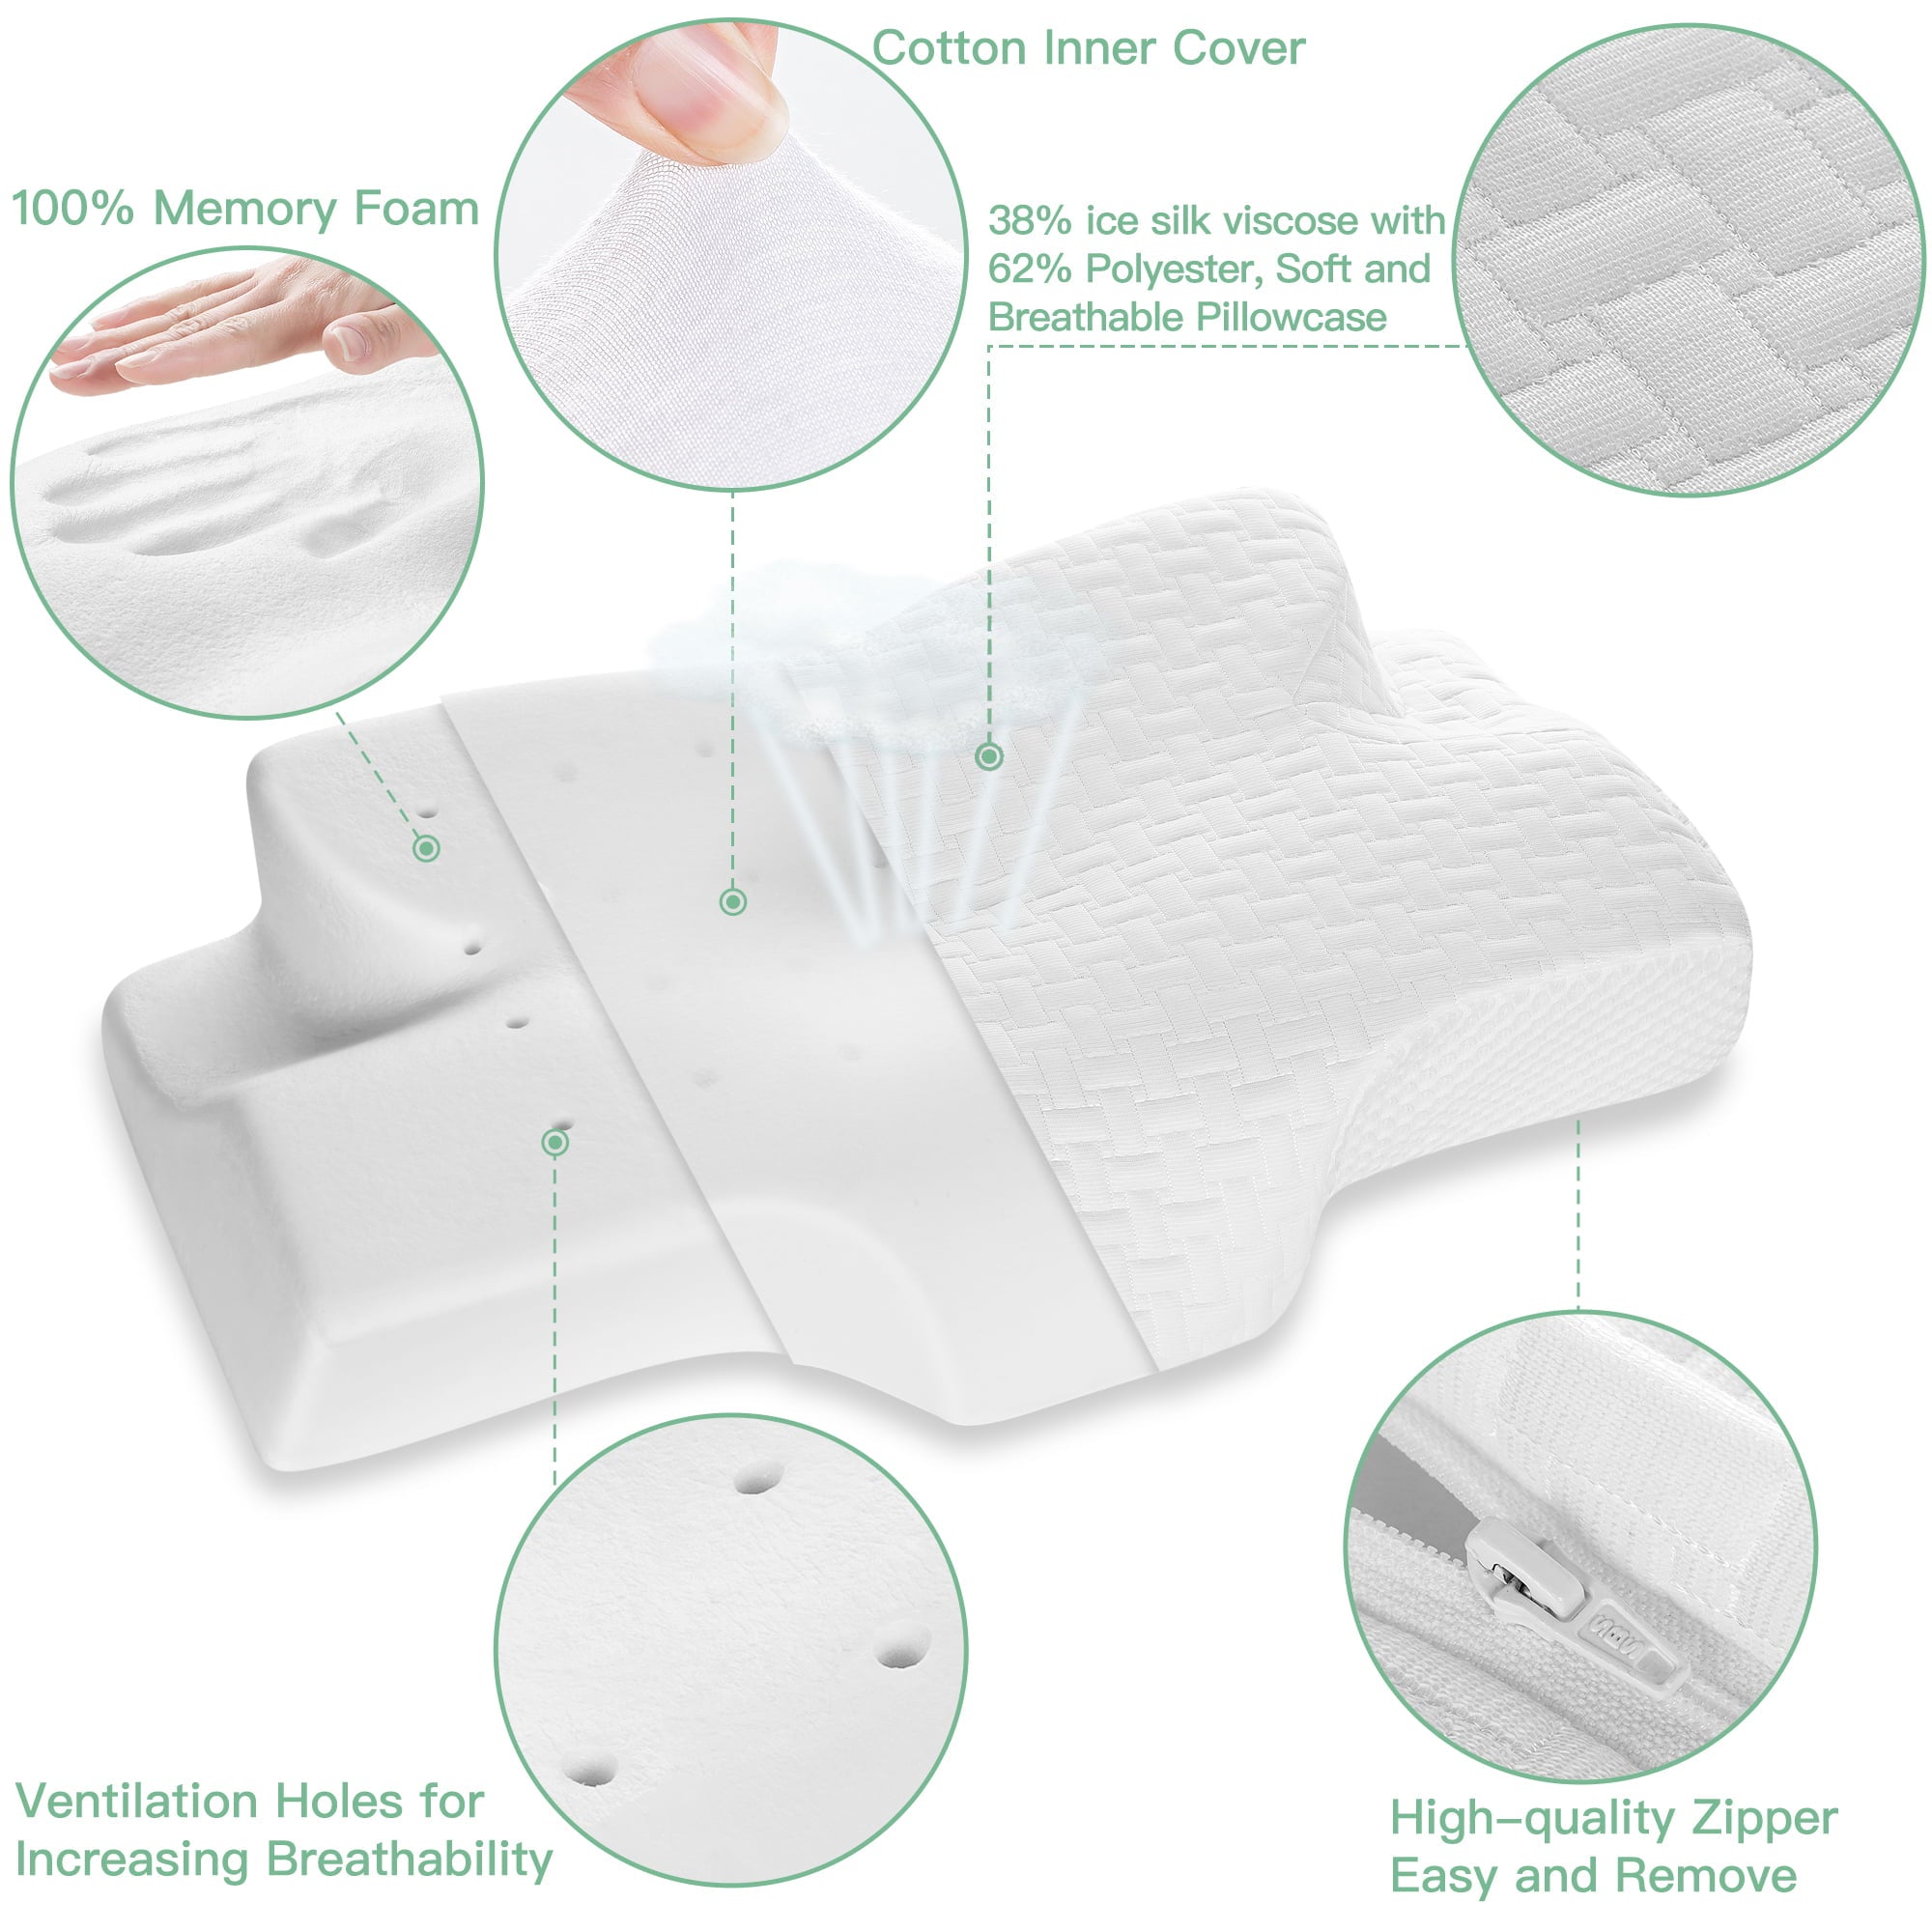 Elviros Memory Foam Cervical Pillow, Ergonomic Contour Pillow for Neck and Shoulder Pain Relief, Orthopedic Sleeping Bed Pillows for Side Sleepers, Back and Stomach Sleepers